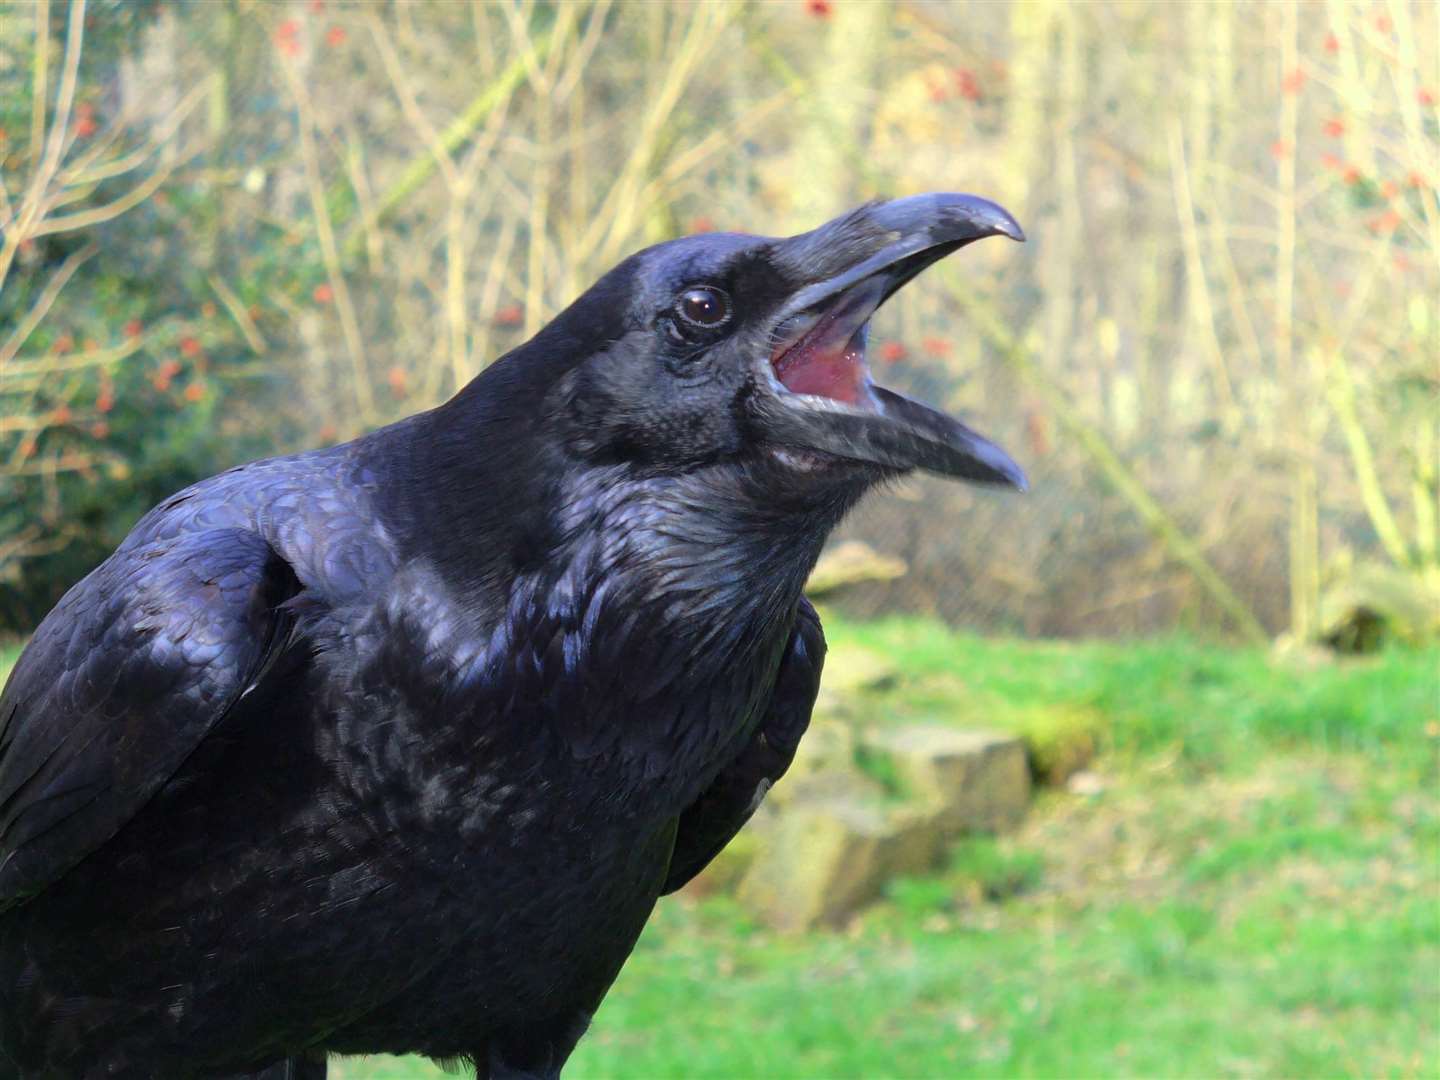 A special licence is required to shoot ravens.